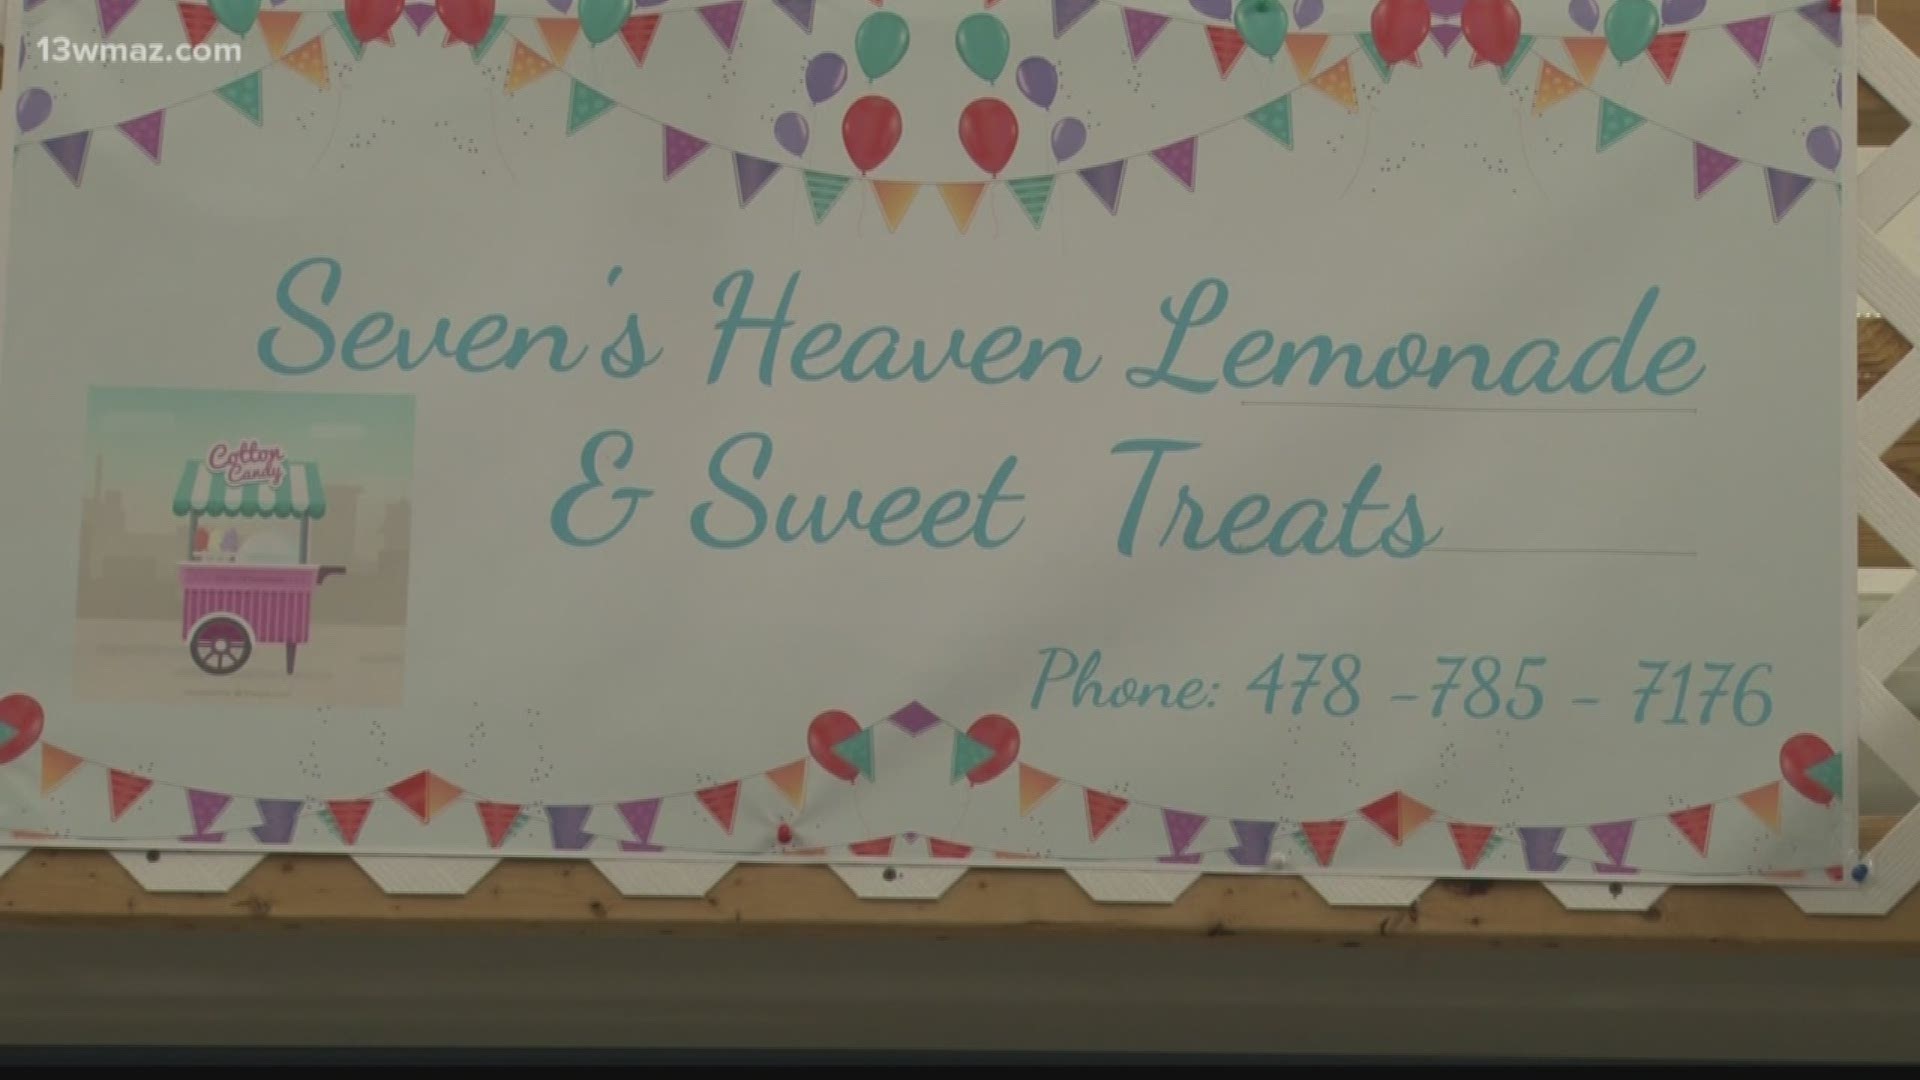 Bridget Robinson and her 12-year-old son Seven opened a lemonade stand two years ago, and now it's grown into their own candy shop. They have a little space in the Macon Flea Market off of Eisenhower Parkway, and they'll soon open in September.